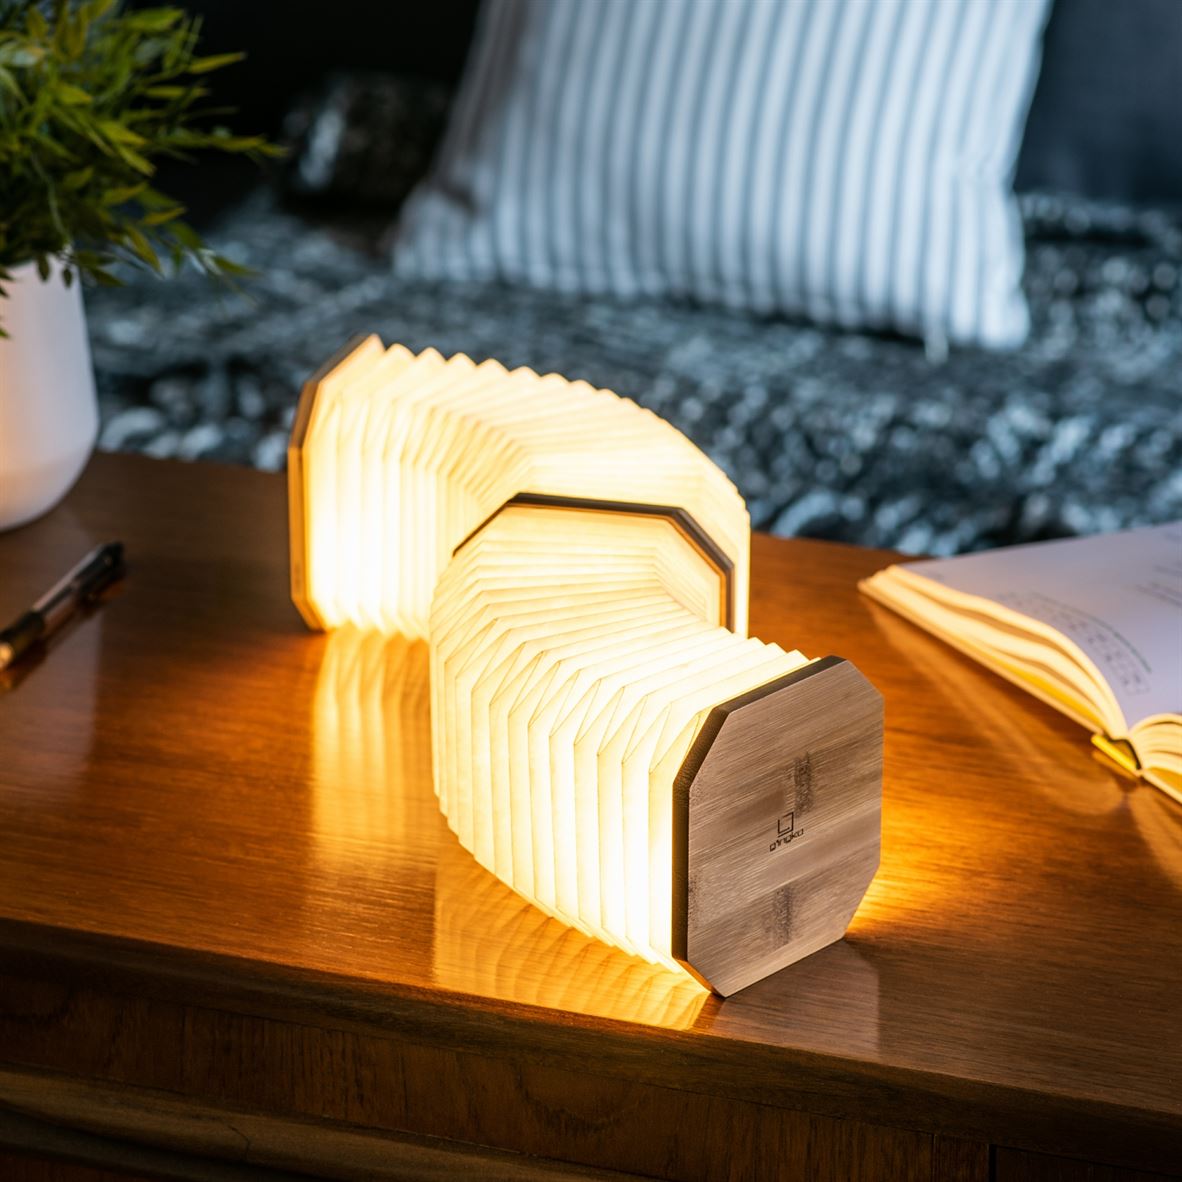 Gingko Smart Accordion Lamp joined in maple